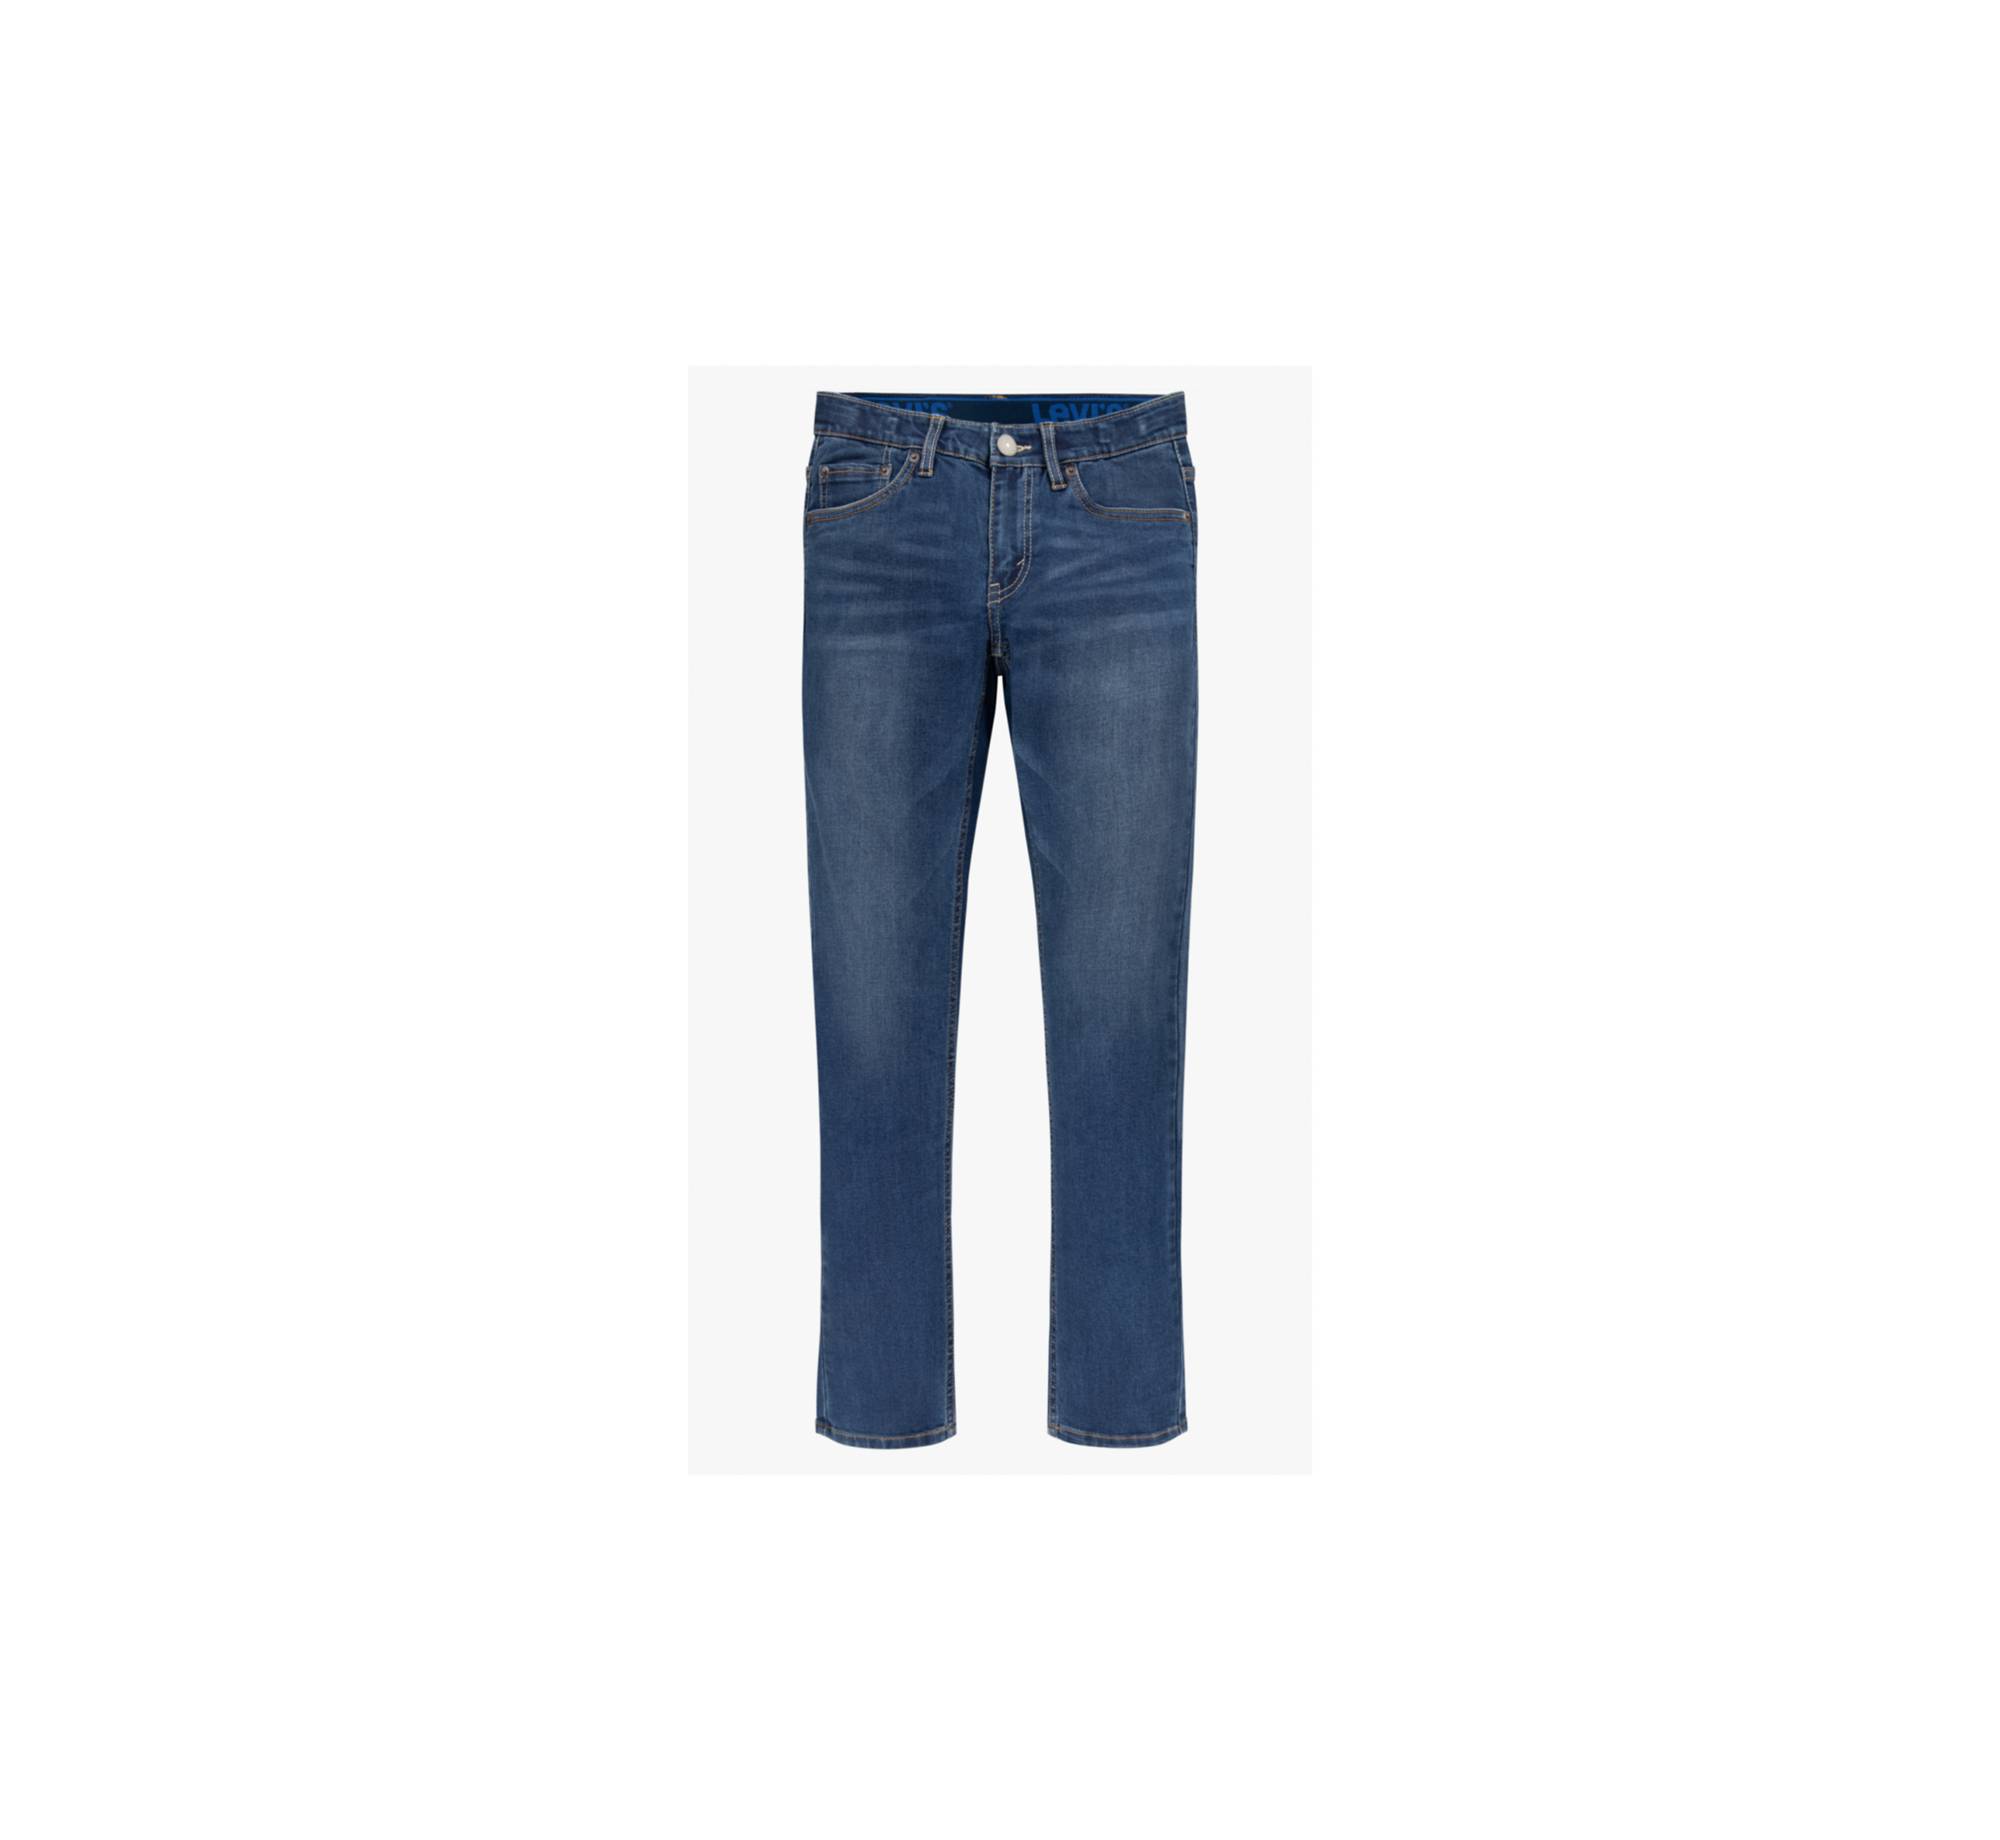 512™ Slim Taper Strong Performance Big Boys Jeans 8-20 1